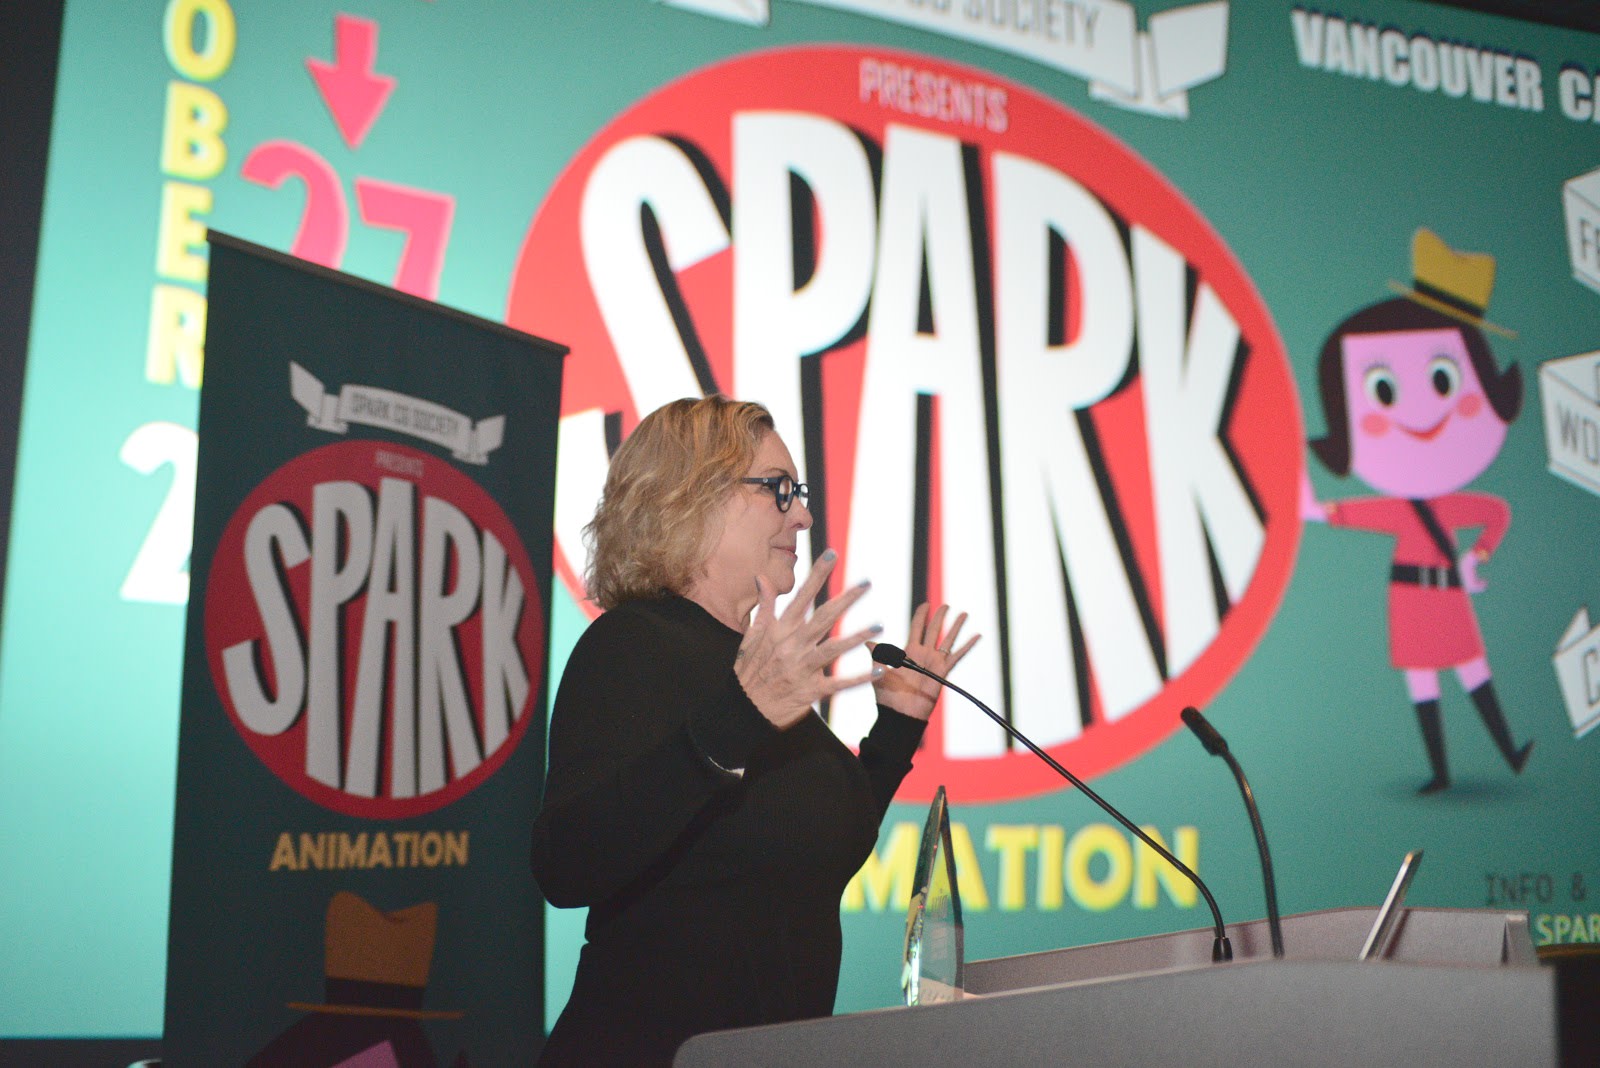 Women in Animation Honors VP Melissa Cobb's Commitment to Diversity 